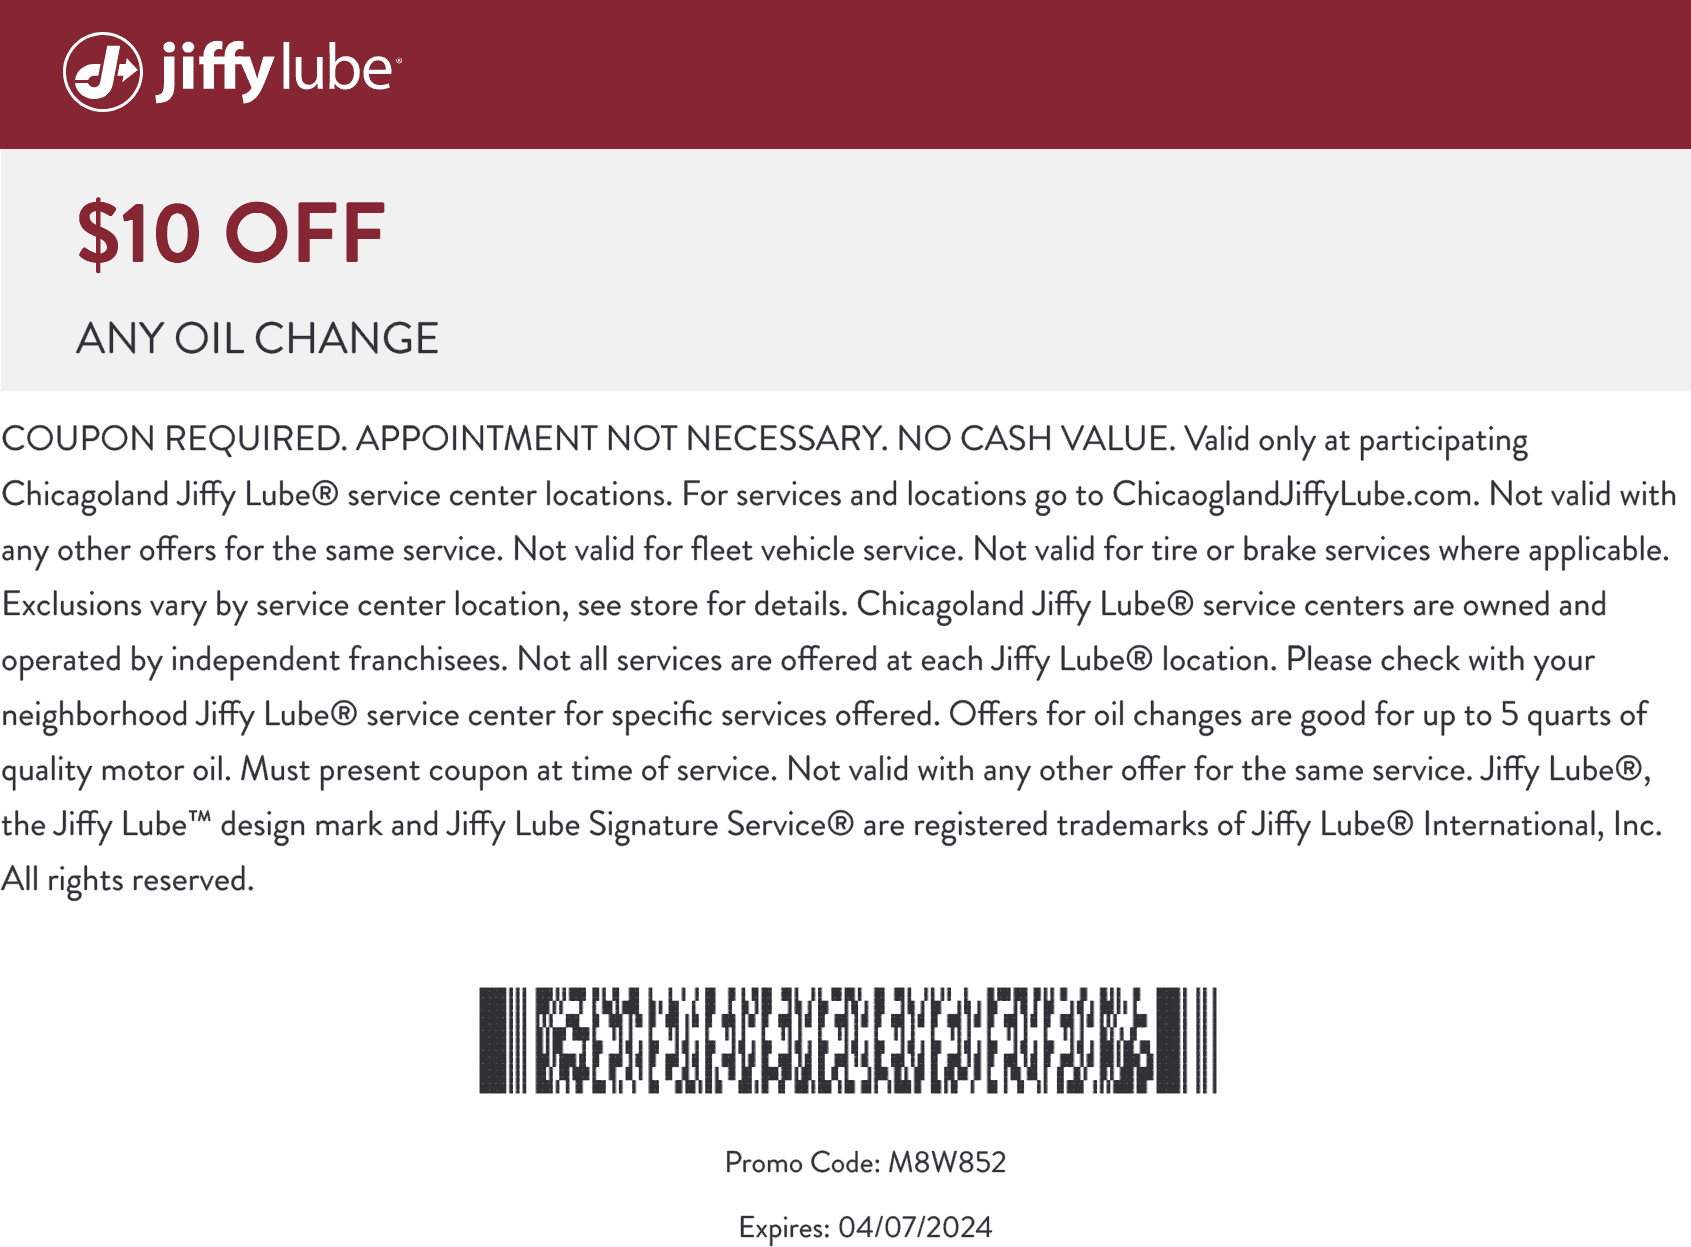 Jiffy Lube stores Coupon  $10 off any oil change at Jiffy Lube #jiffylube 